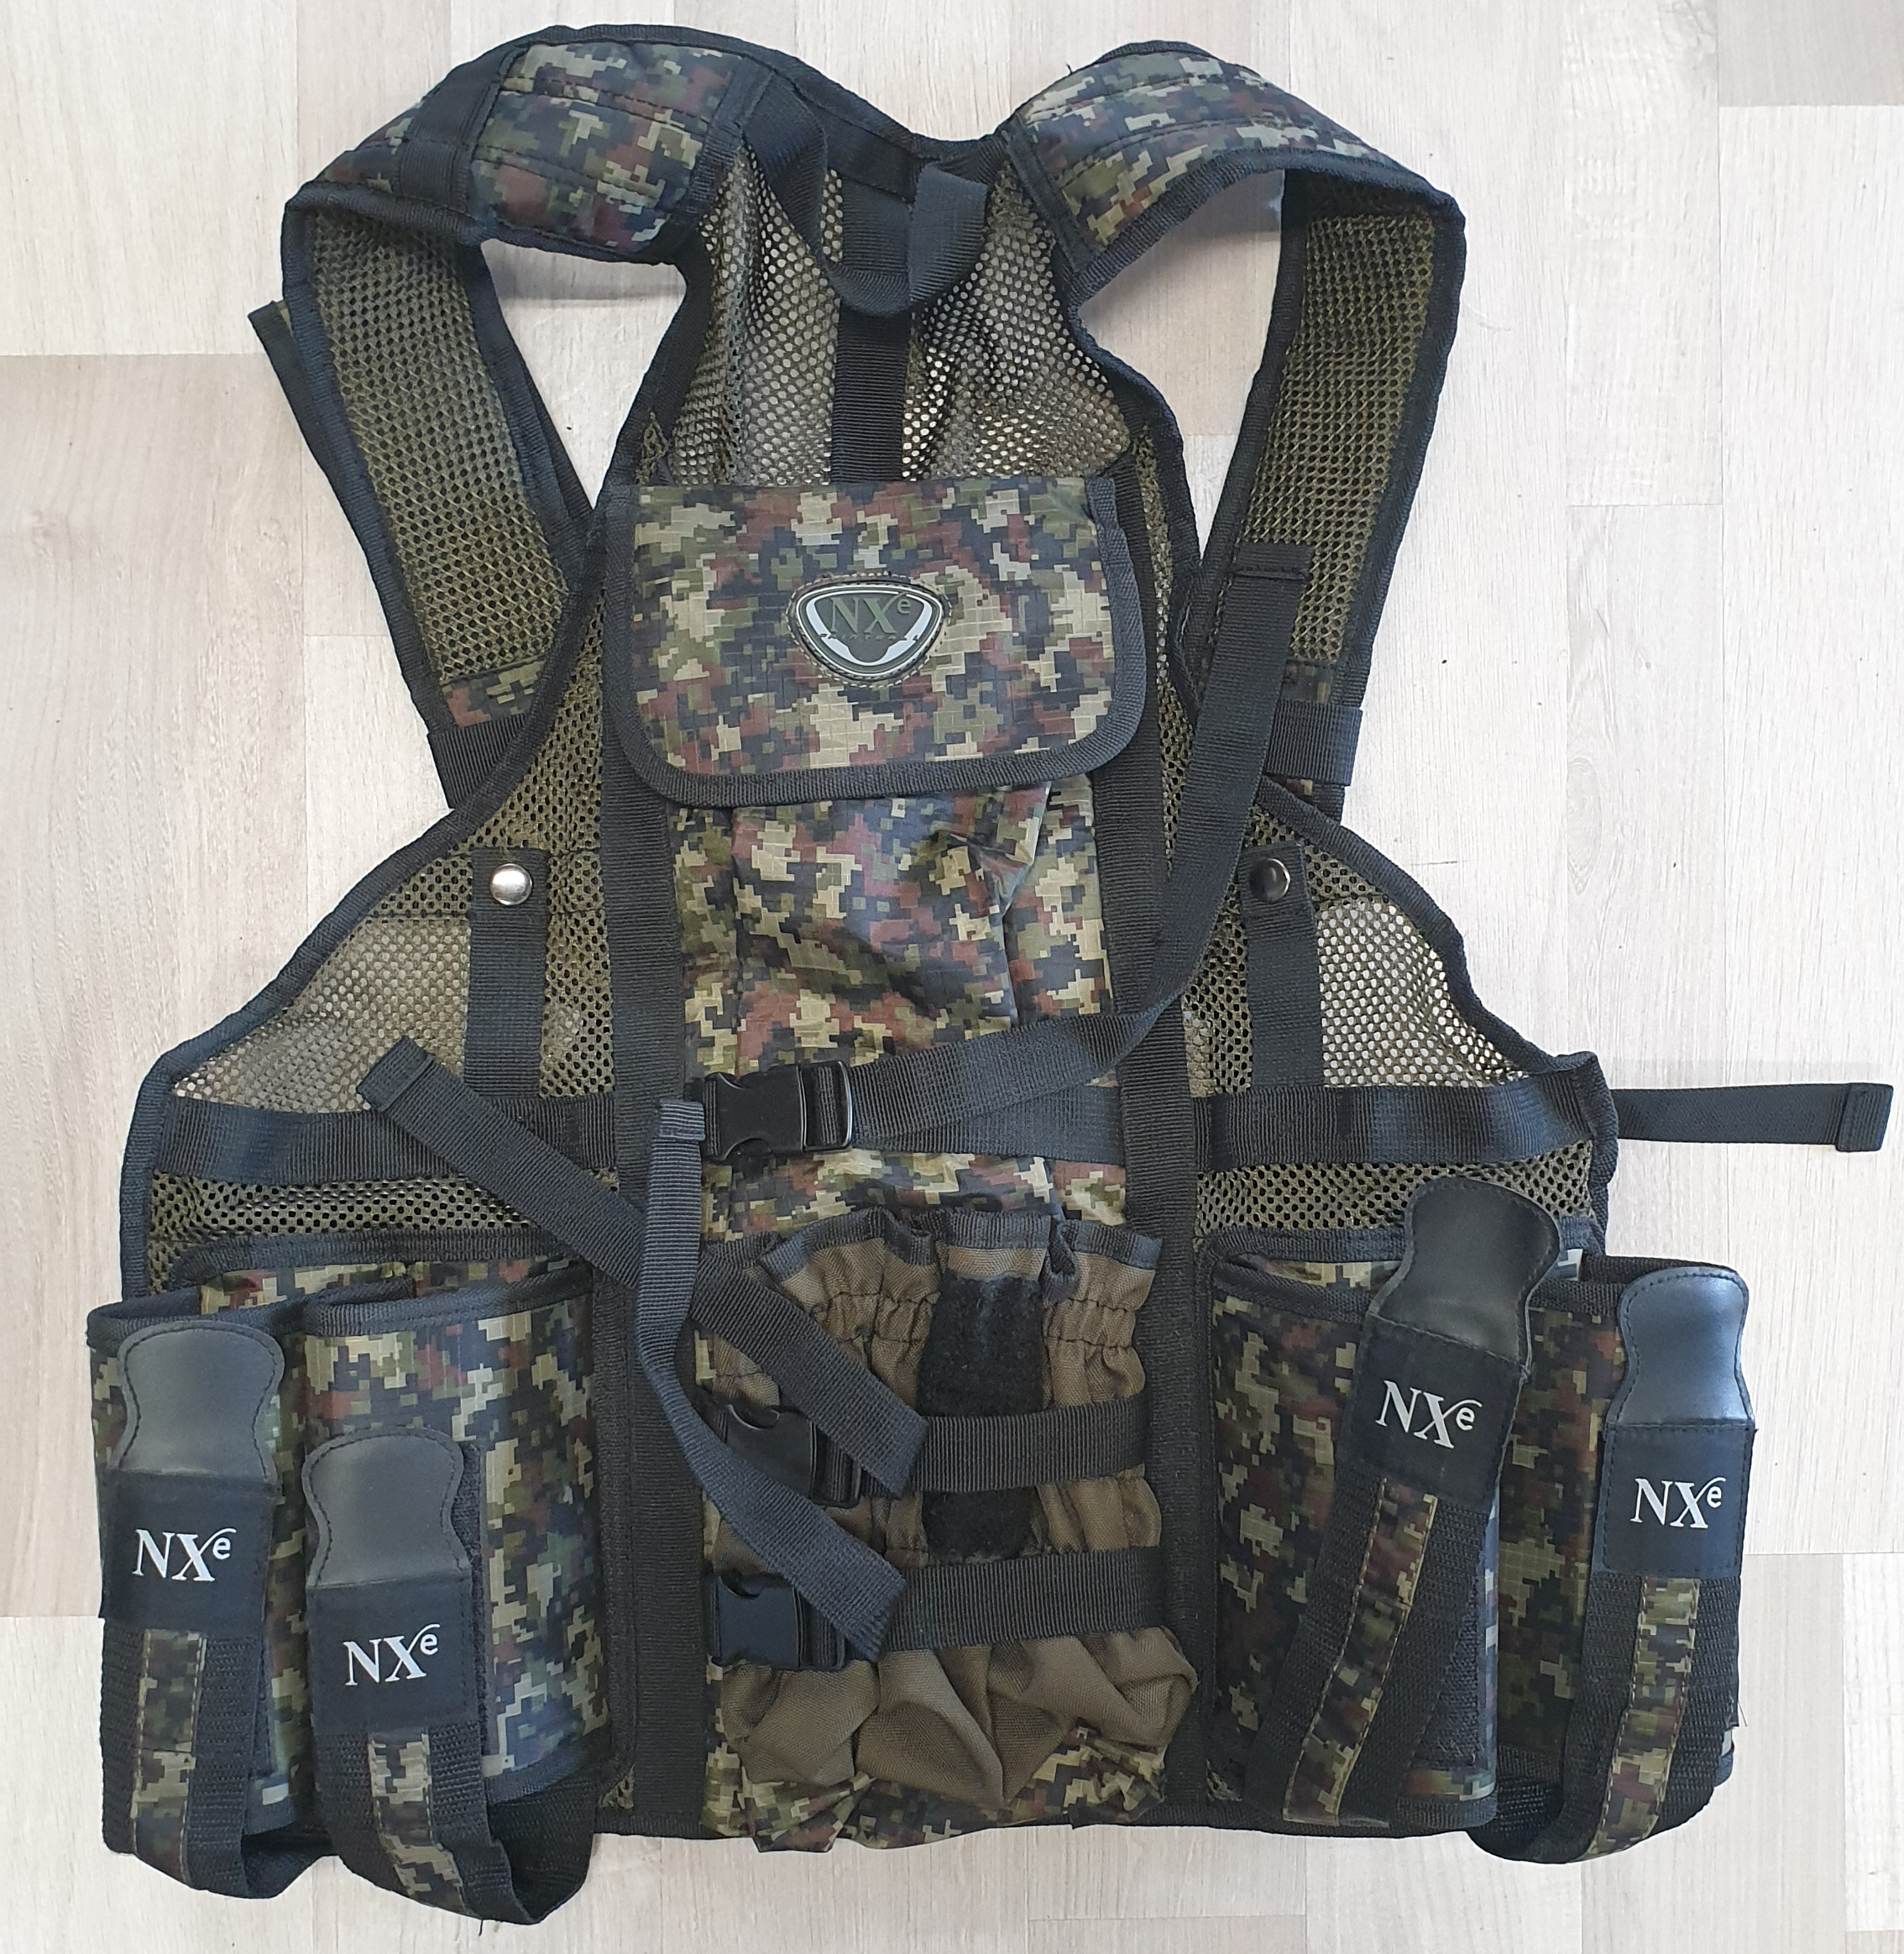 NXe Tactical Vest - USED